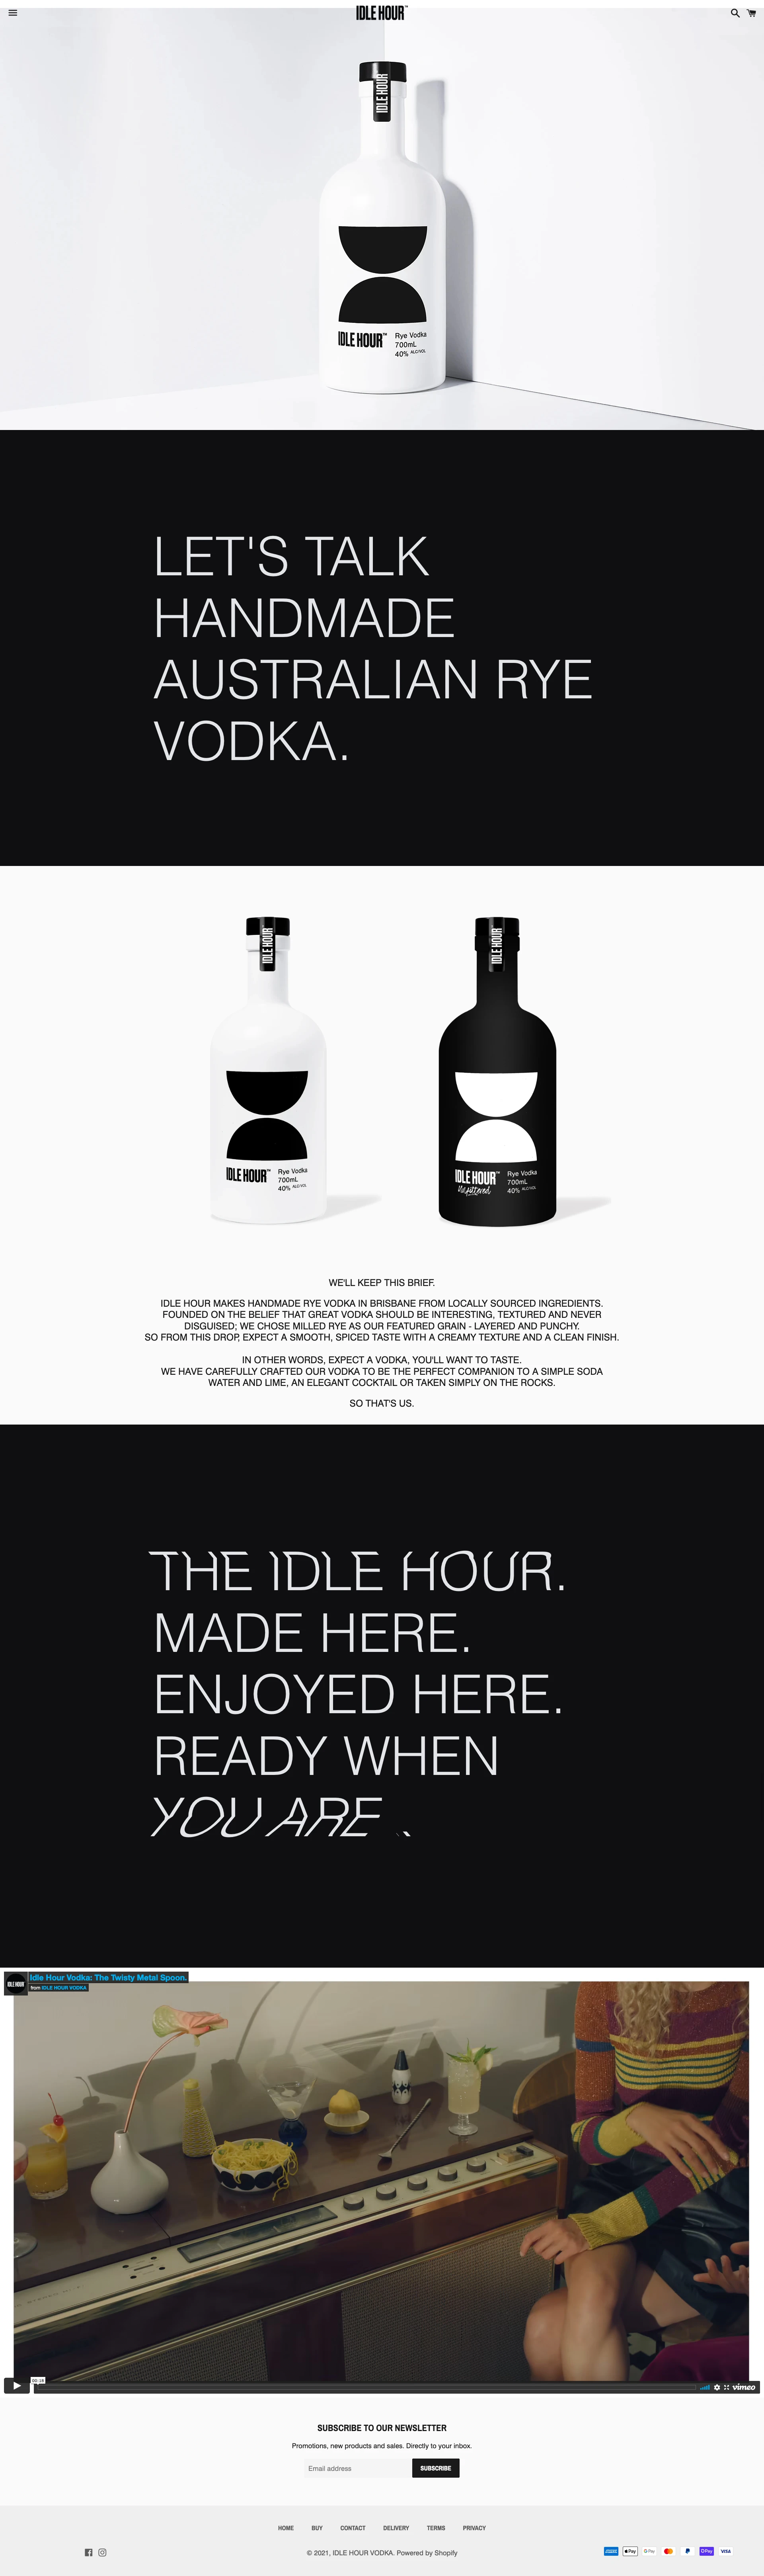 Idle Hour Vodka Landing Page Example: Handmade Australian Rye Vodka. Made here. Enjoyed here. Ready when you are.